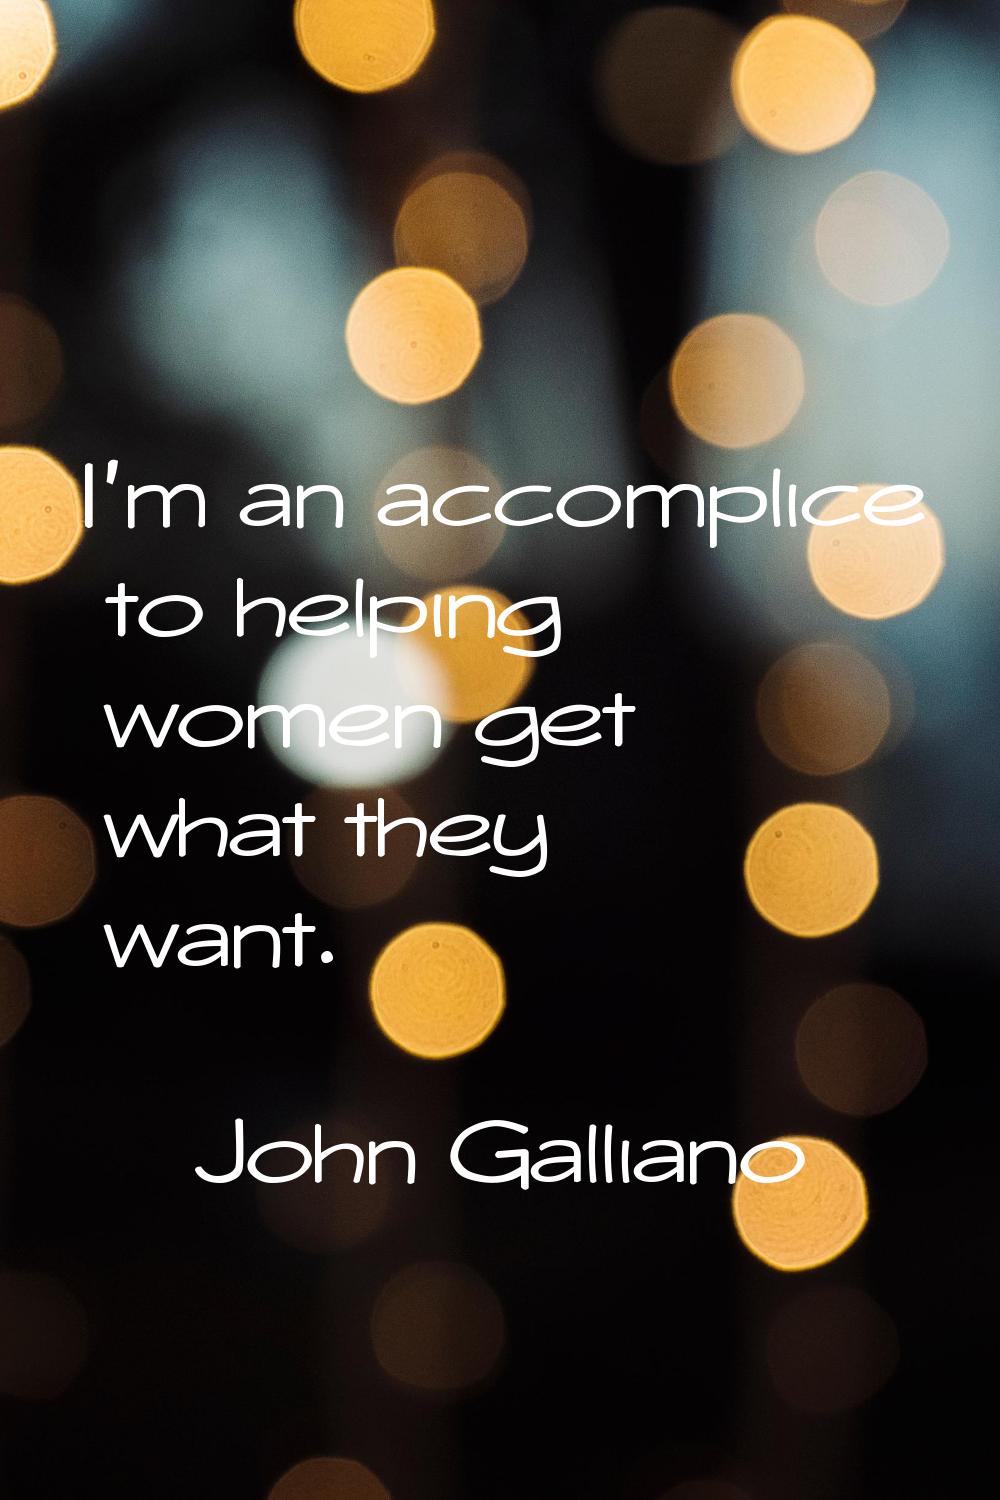 I'm an accomplice to helping women get what they want.